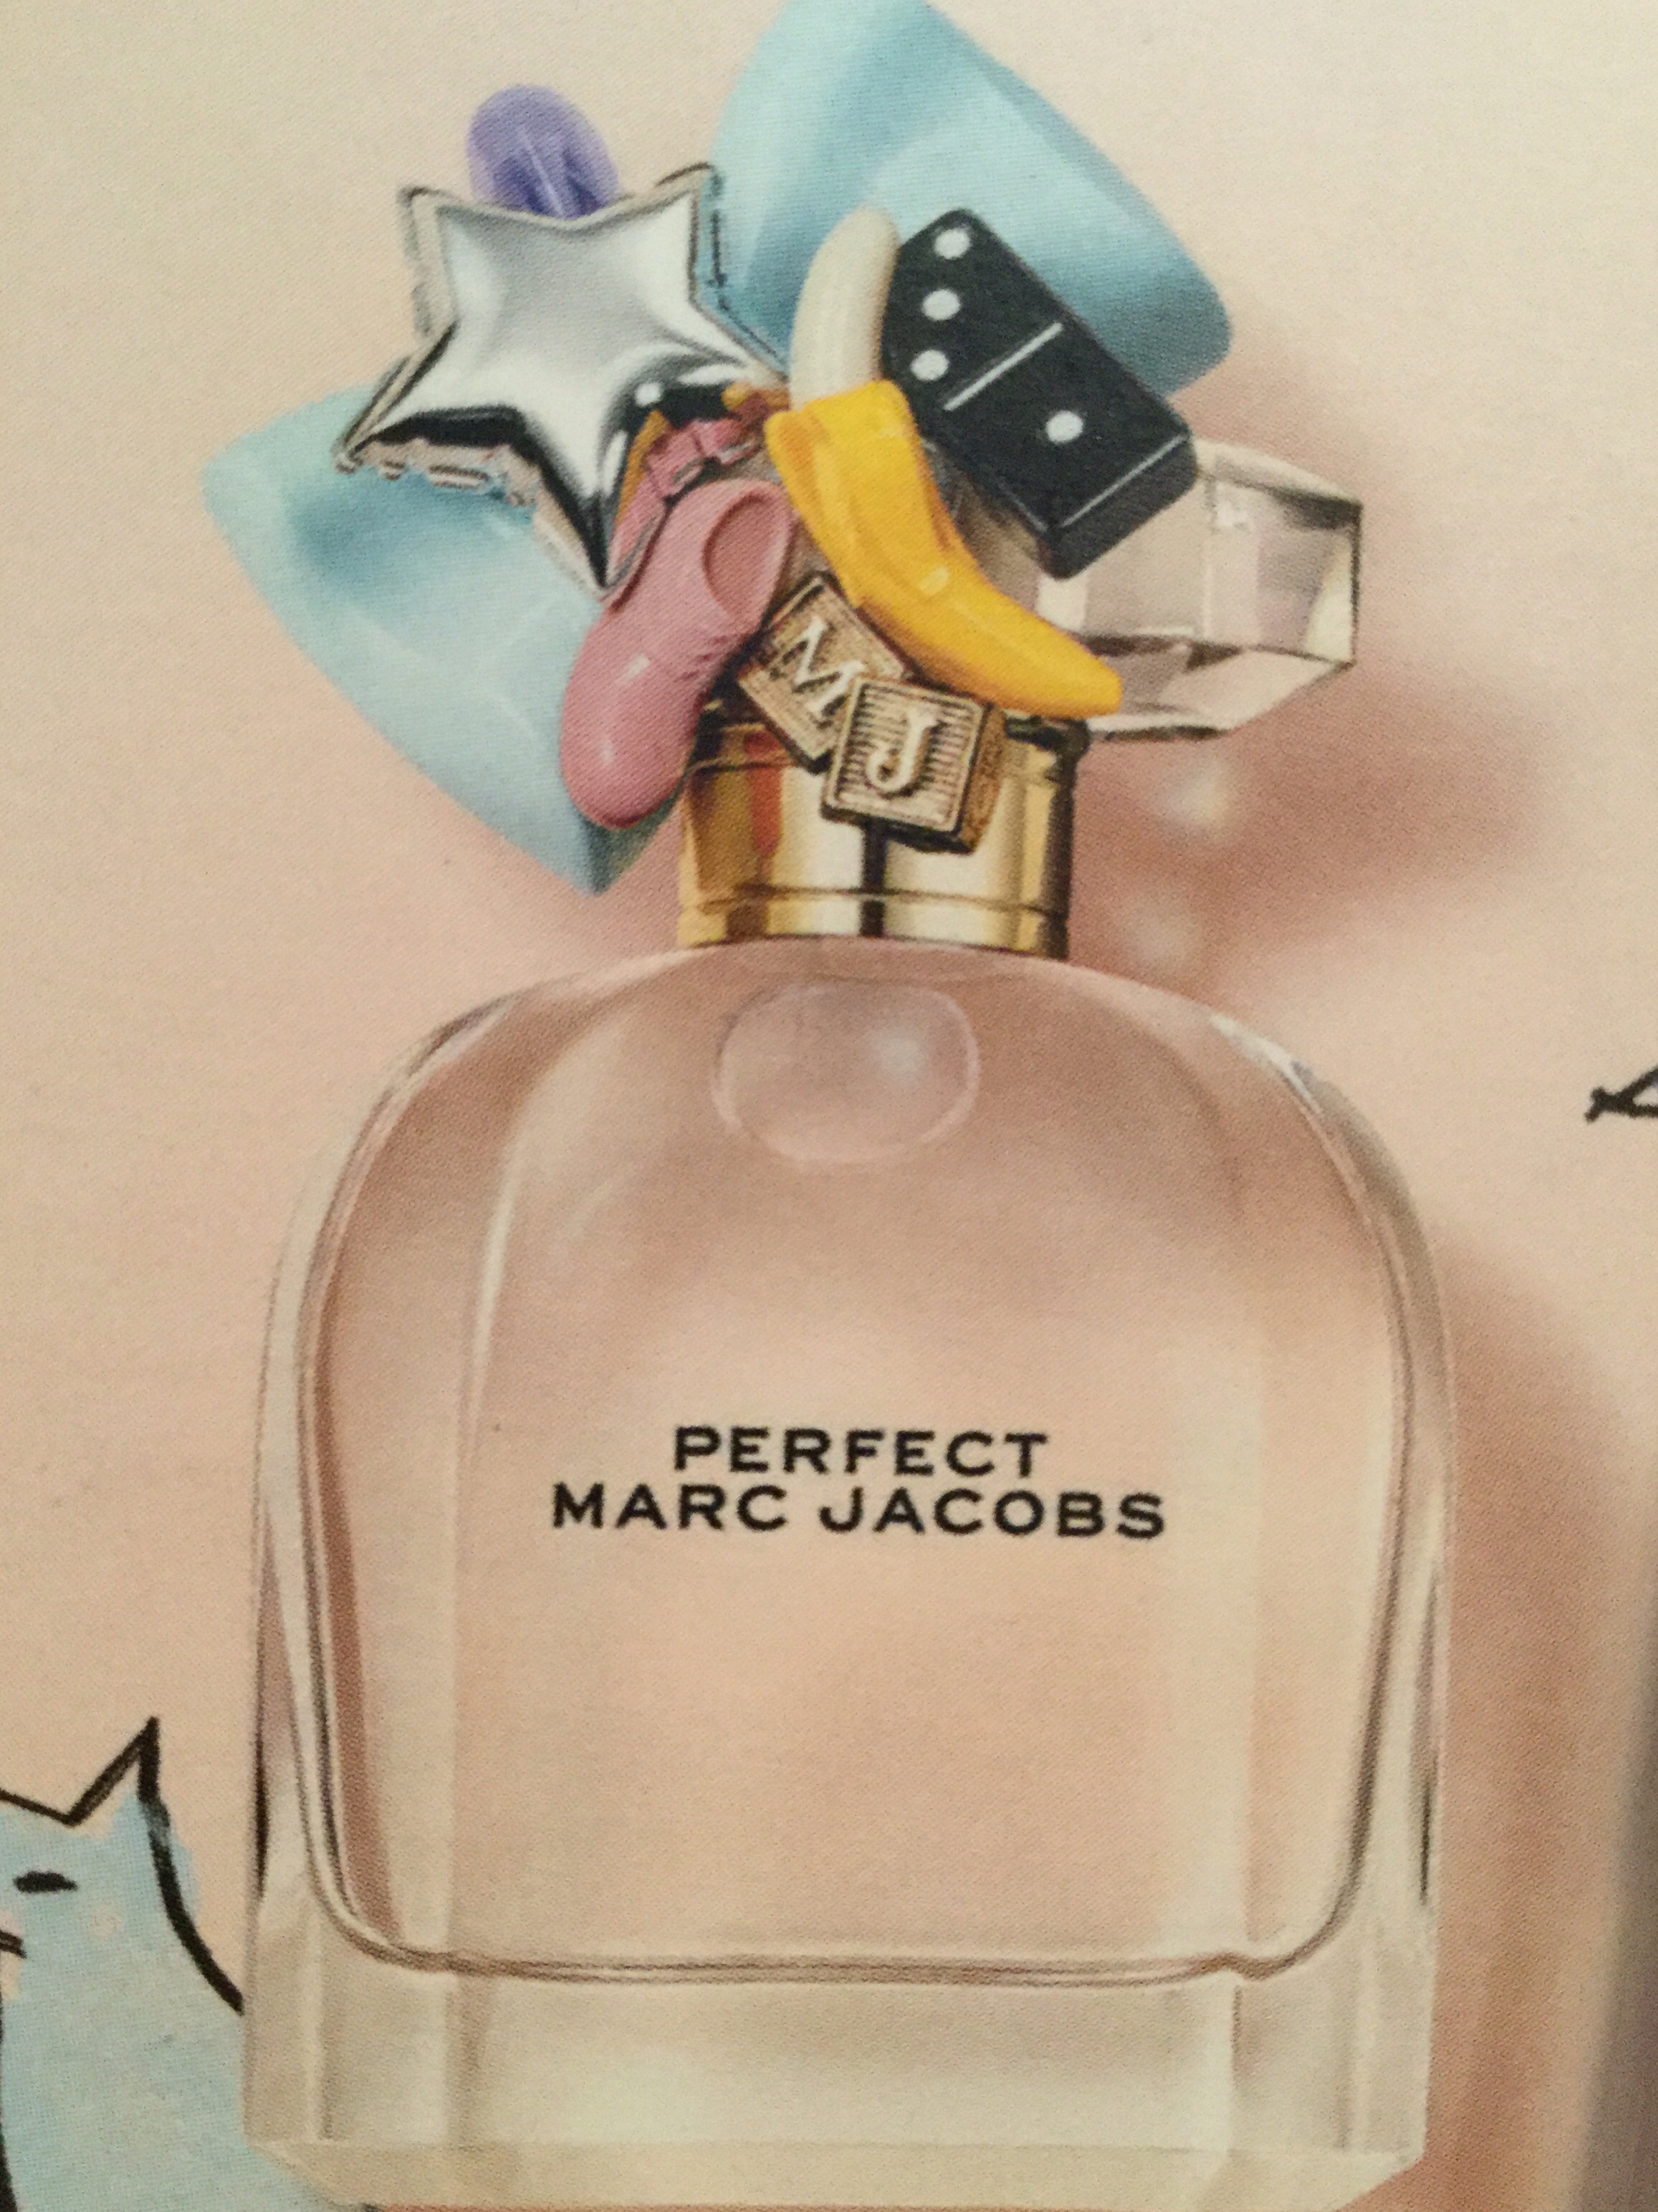 Perfume Review: Perfect by Marc Jacobs – Ms. Mimsy Reviews